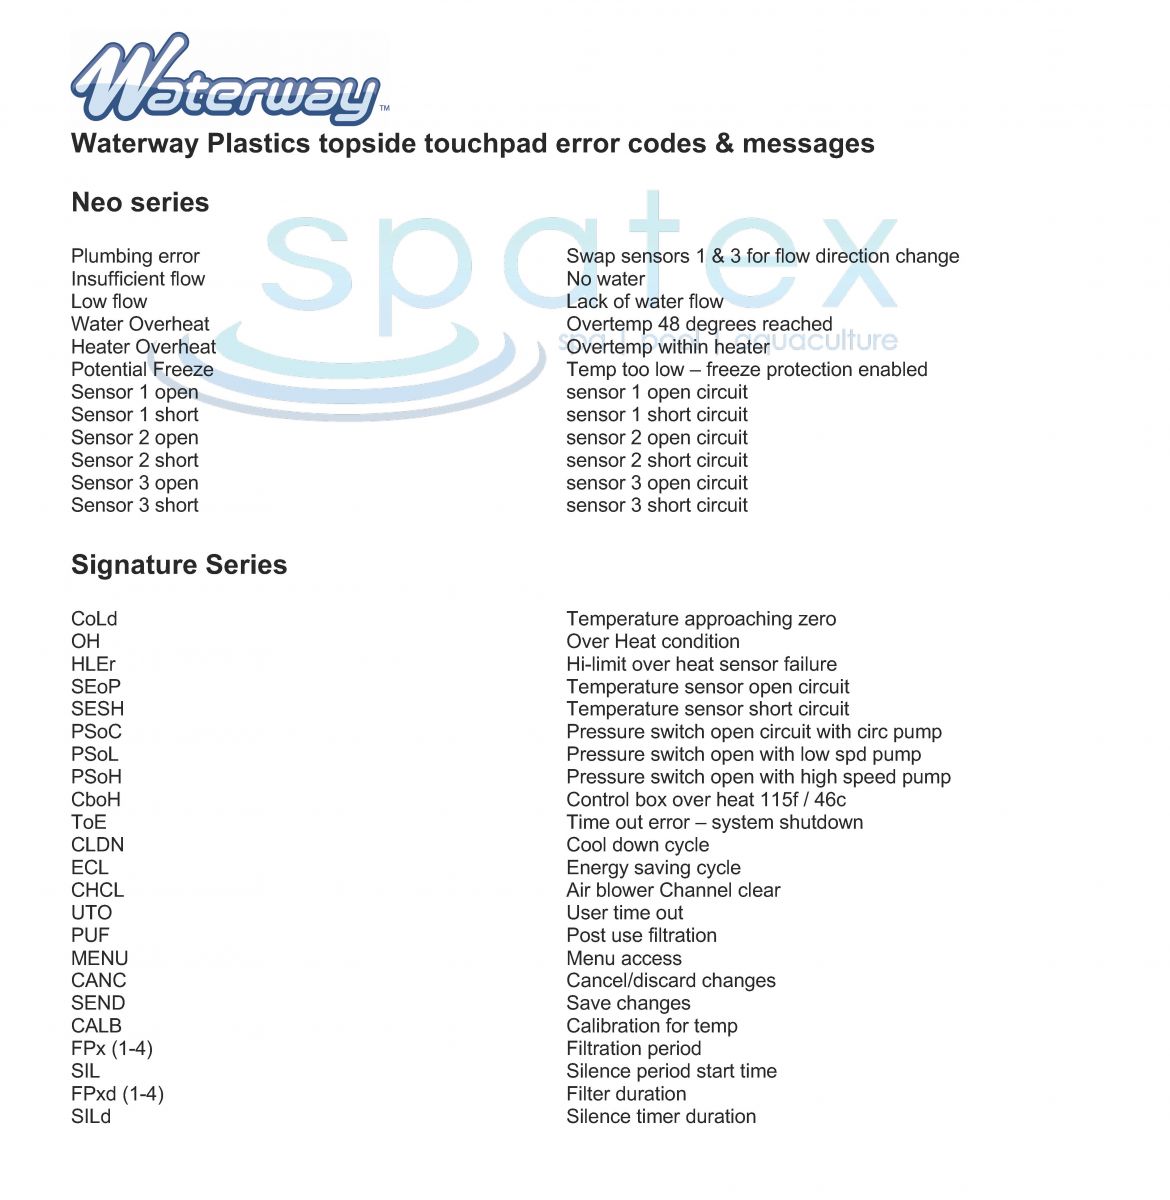 Waterway Plastics Neo & Signature topside error fault codes and messages